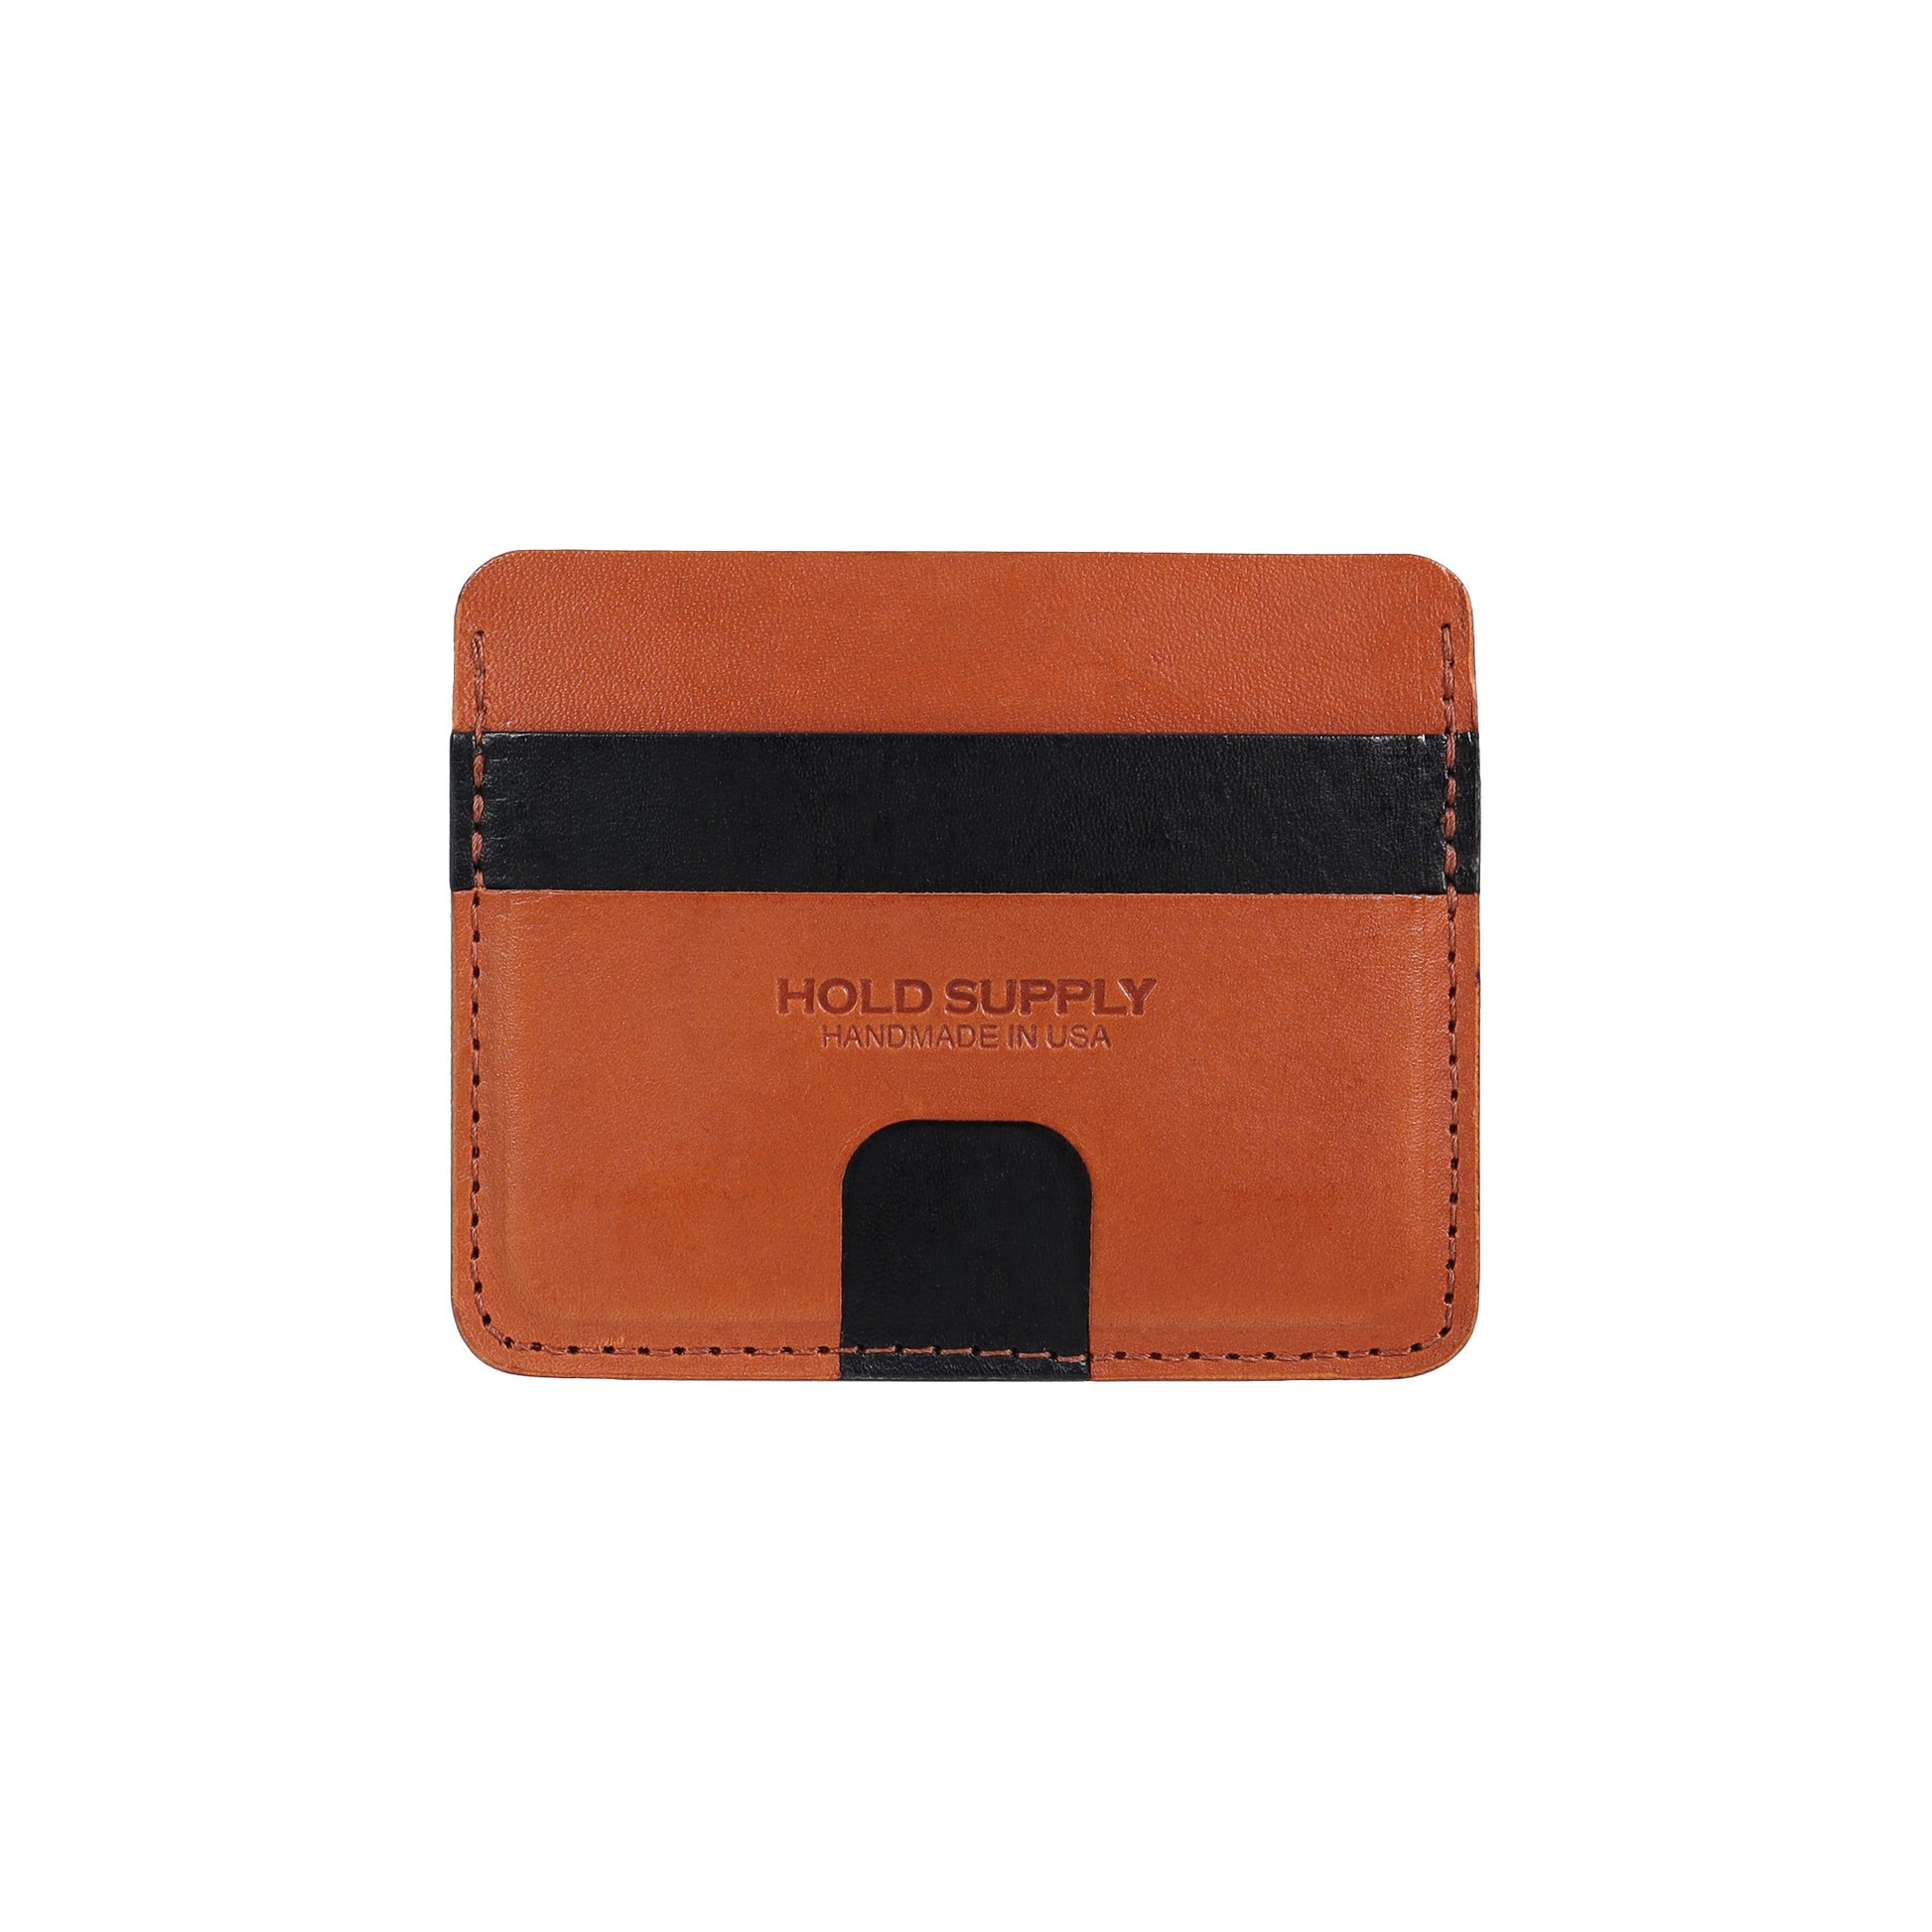 The Tanned Cow- Minimalist Card Holder Wallet Men, Black, Card